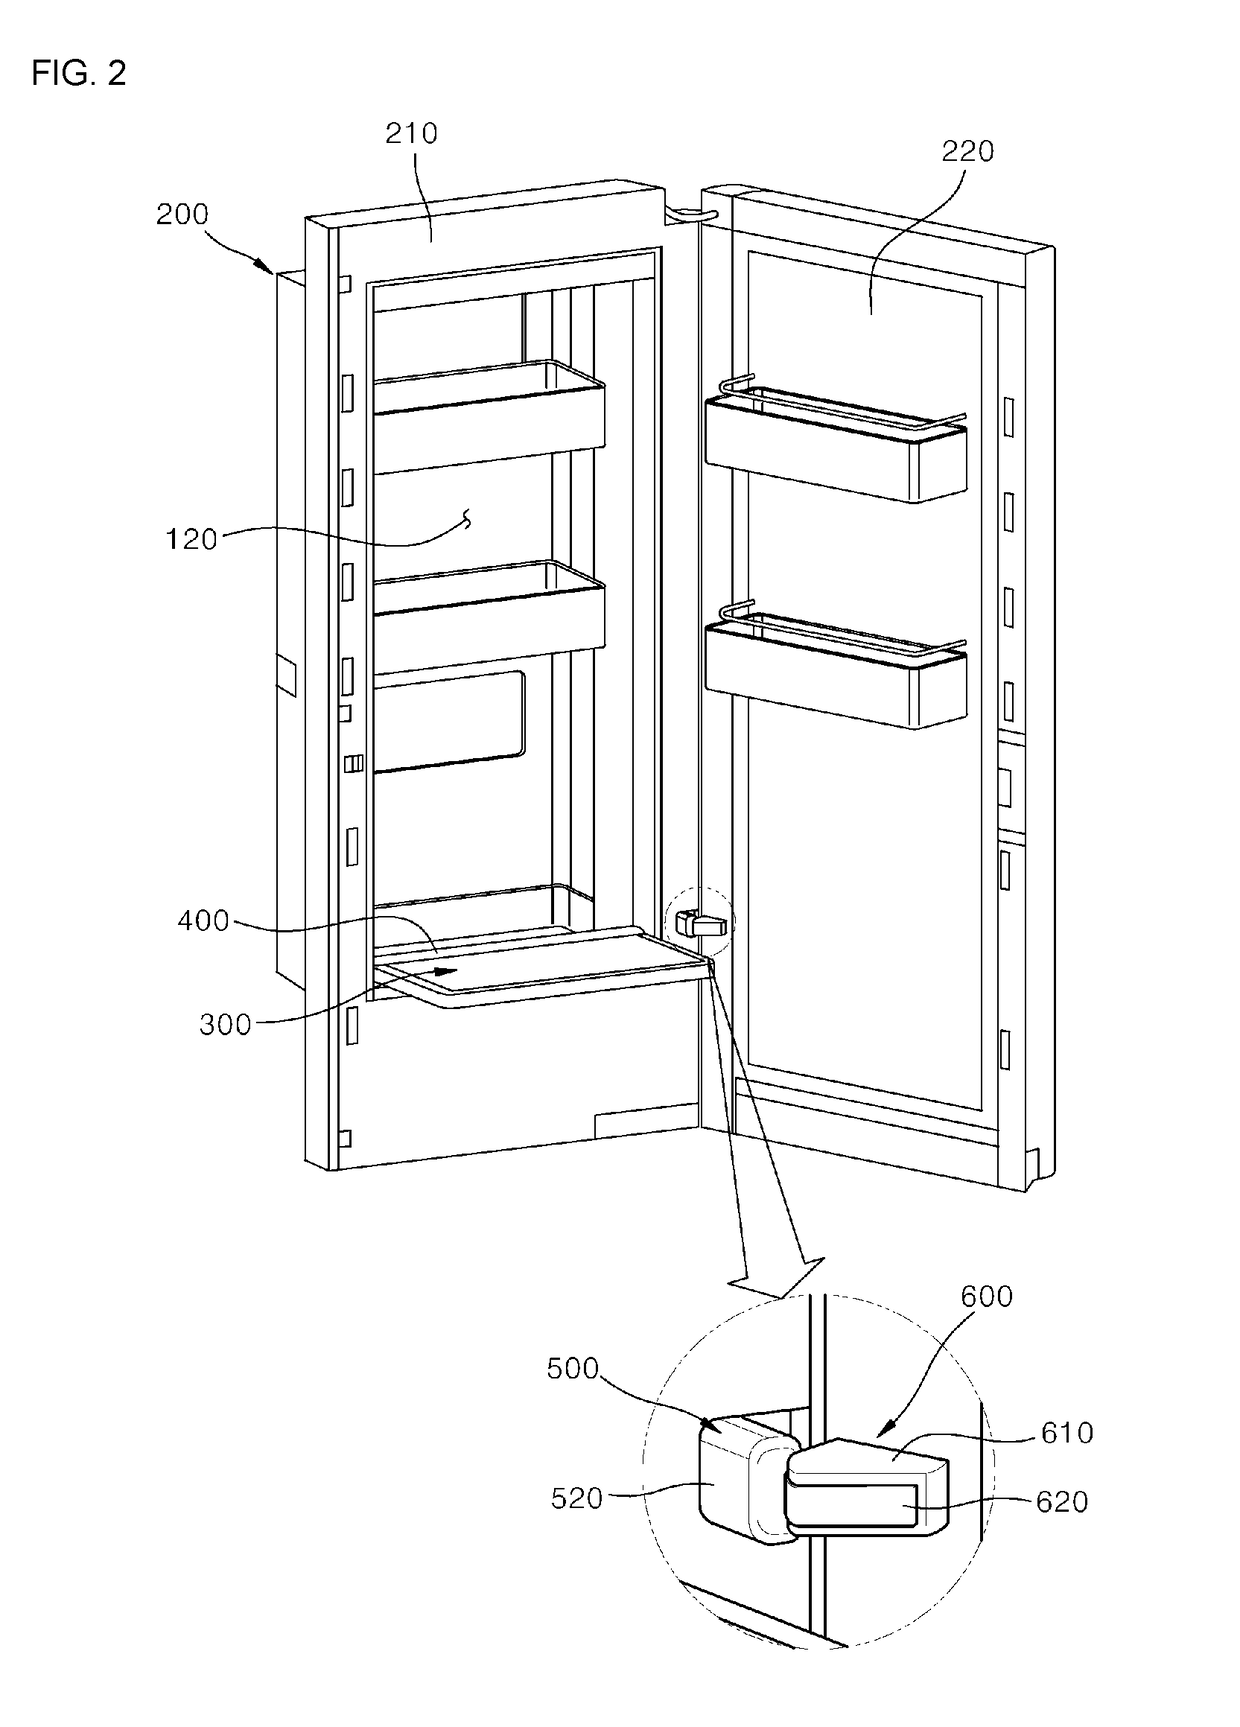 Refrigerator and folding guide device provided therein